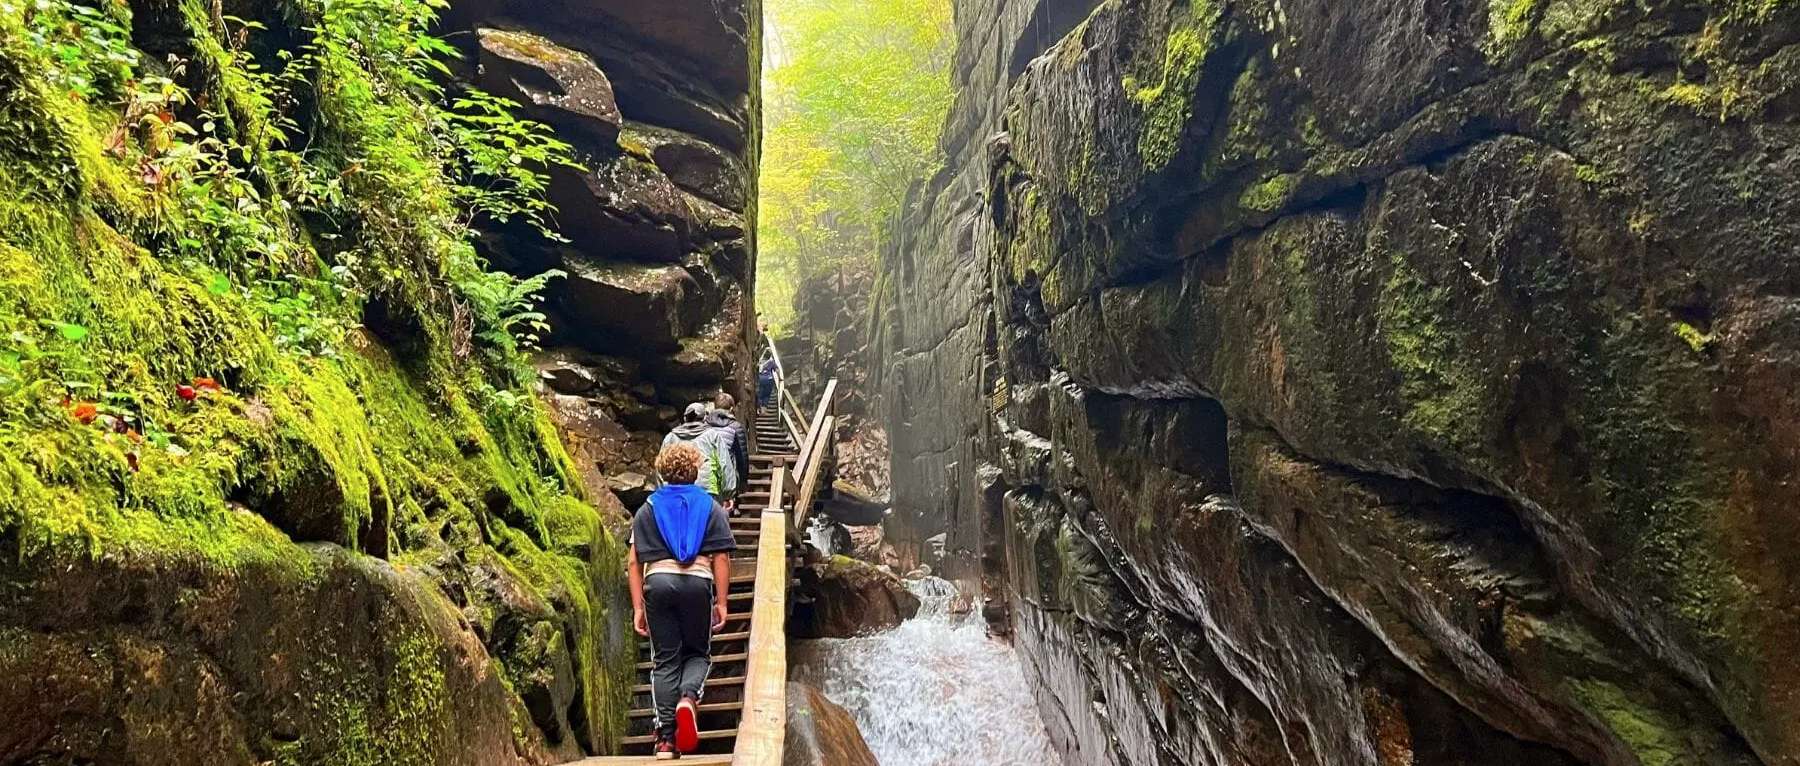 Flume Gorge at Franconia Notch State Park in New Hampshire